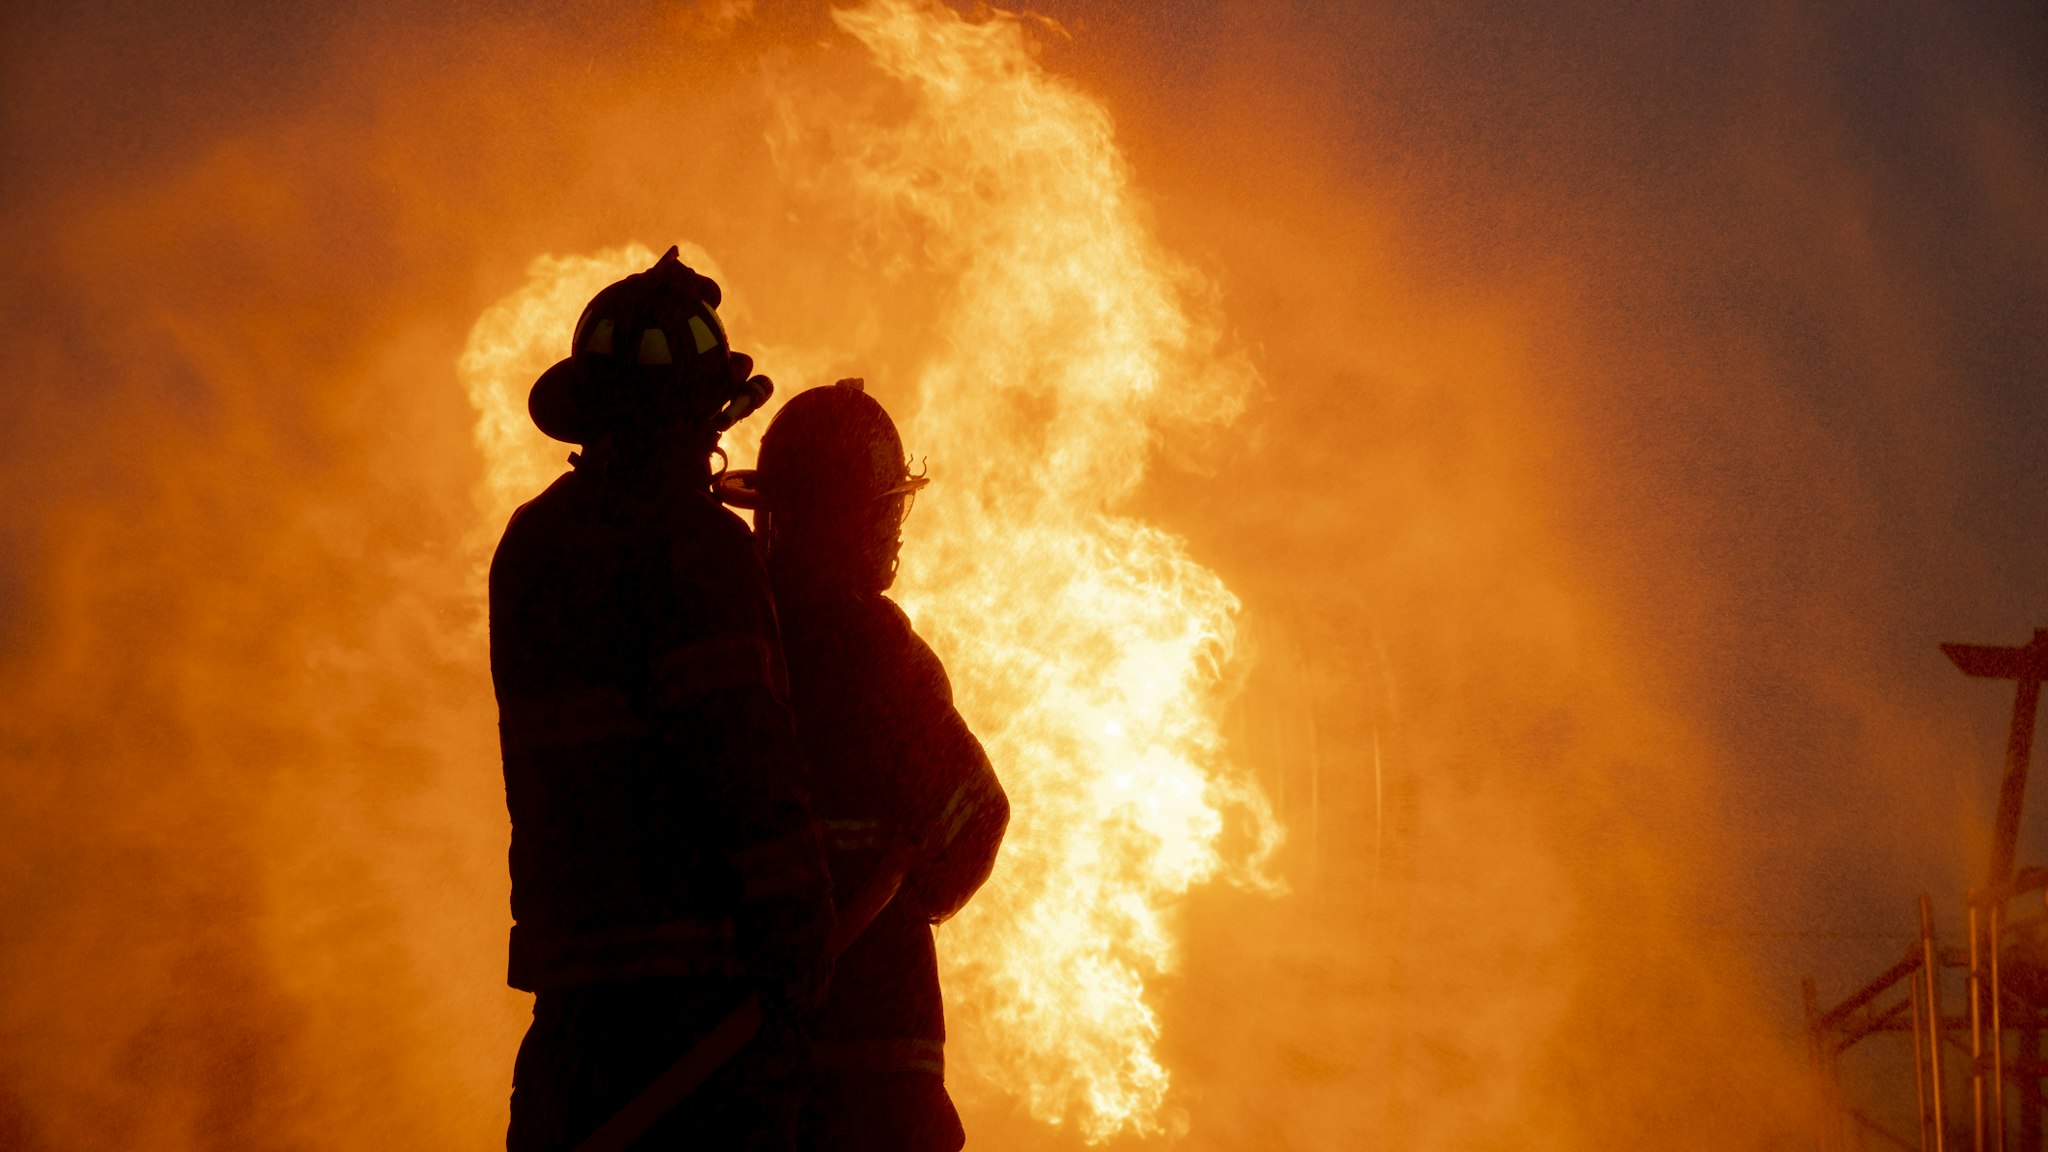 Silhouette of two firefighter in front of the big fire, Fire insurance concept - stock photo